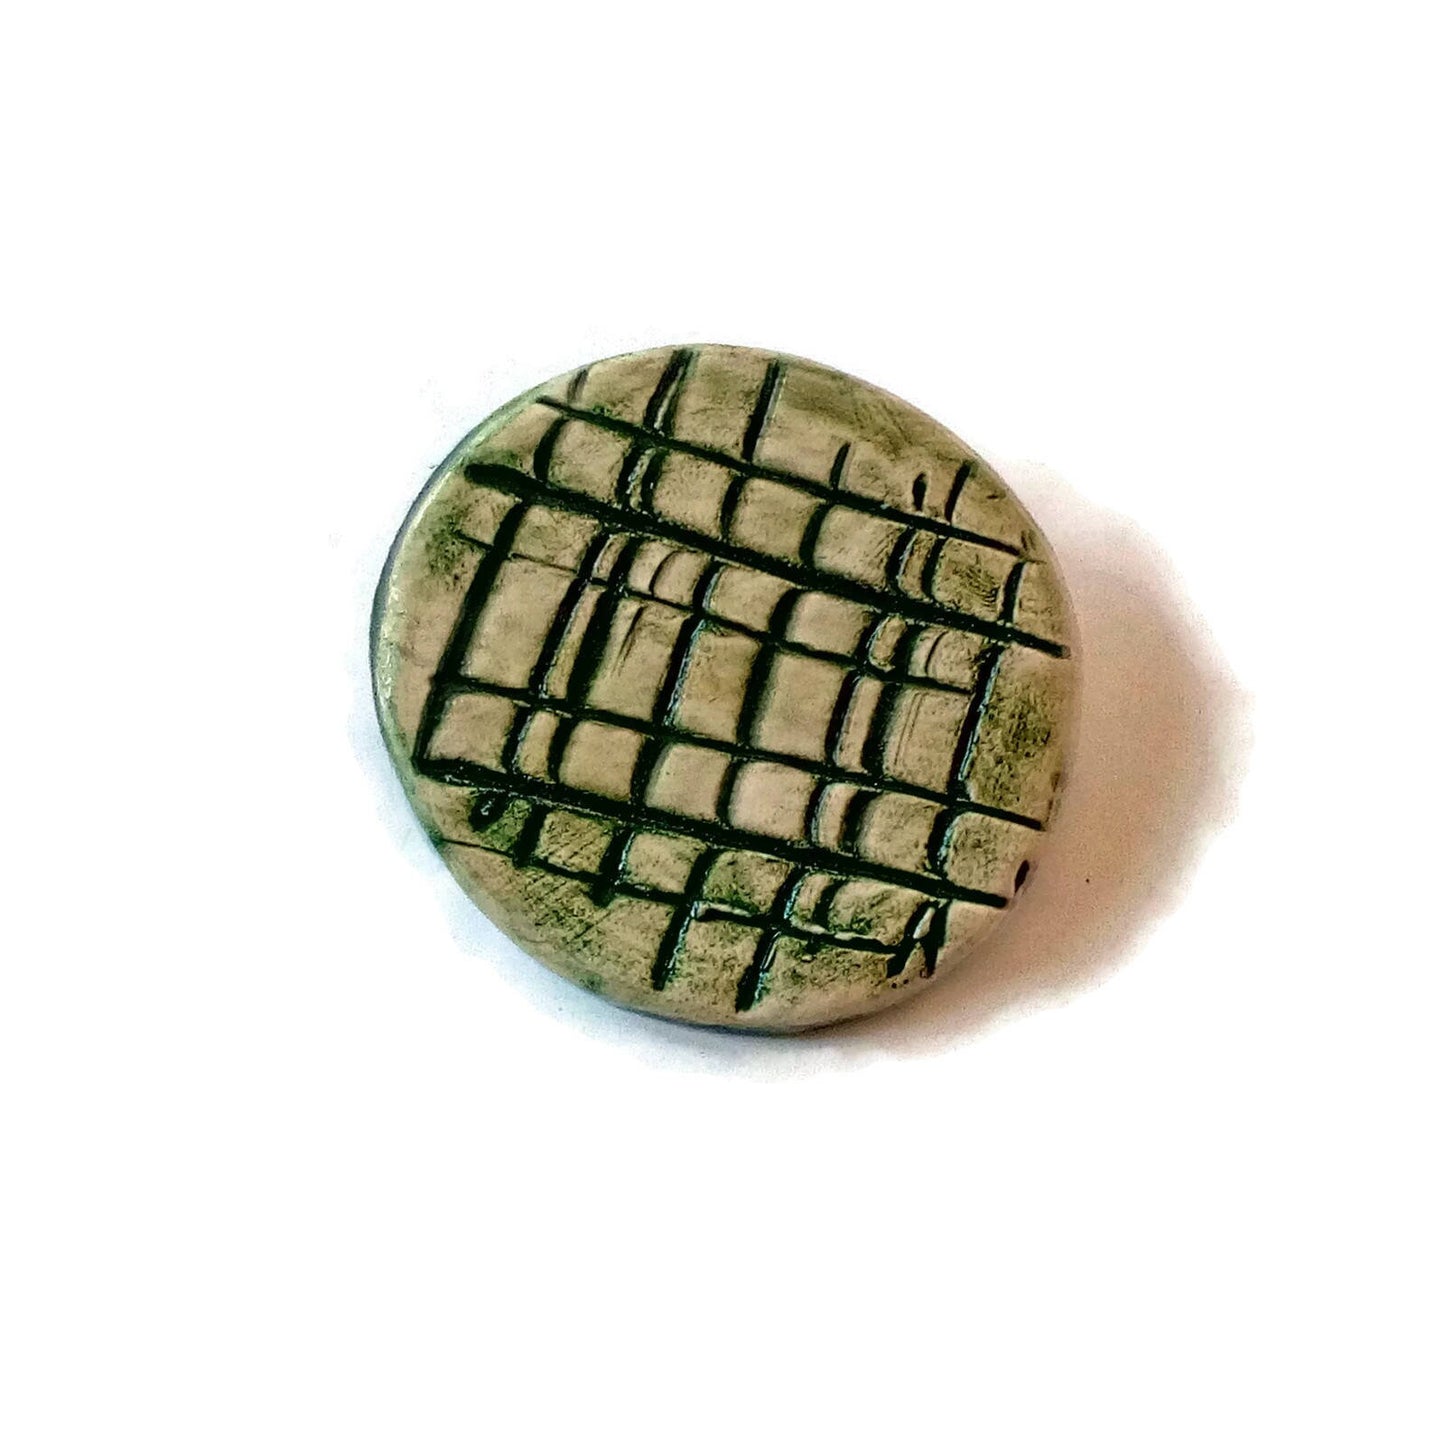 Handmade Ceramic Green Textured Brooch For Women, Round Shaped Clothing Brooch For Her, Lapel Pin Gift For Him, 9th Anniversary Gift Idea - Ceramica Ana Rafael